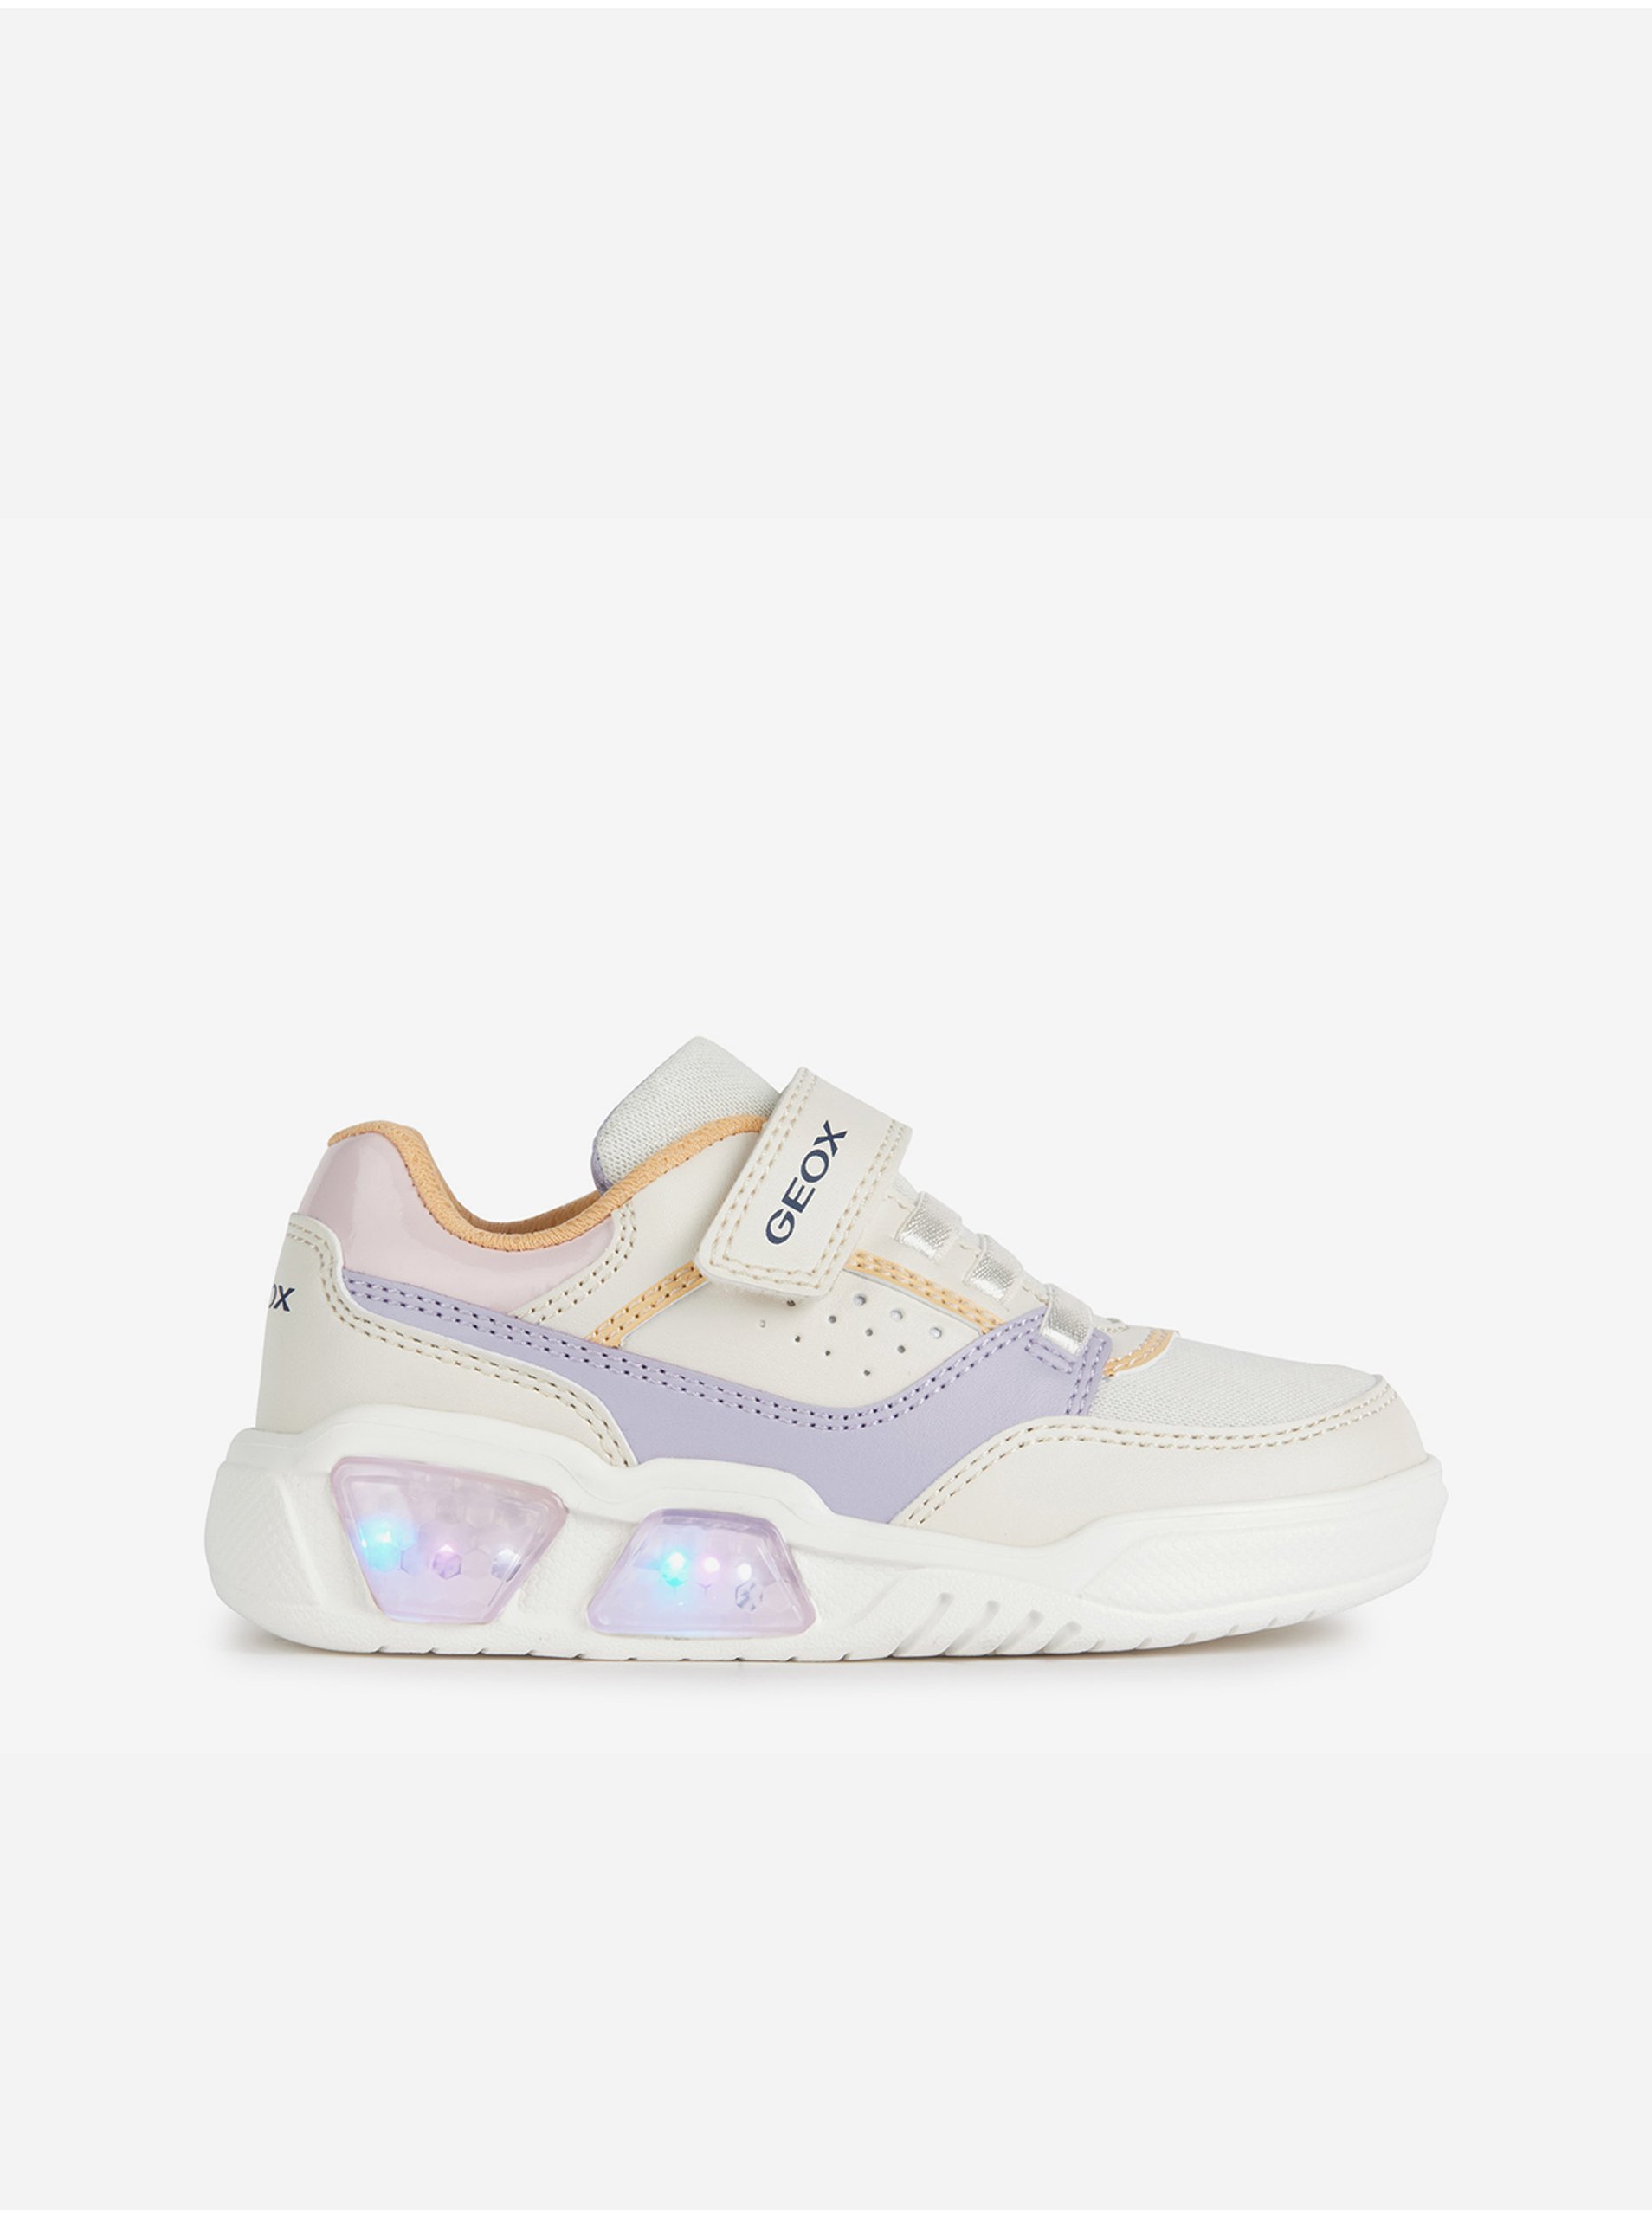 Light purple and white girly sneakers Geox - Girls